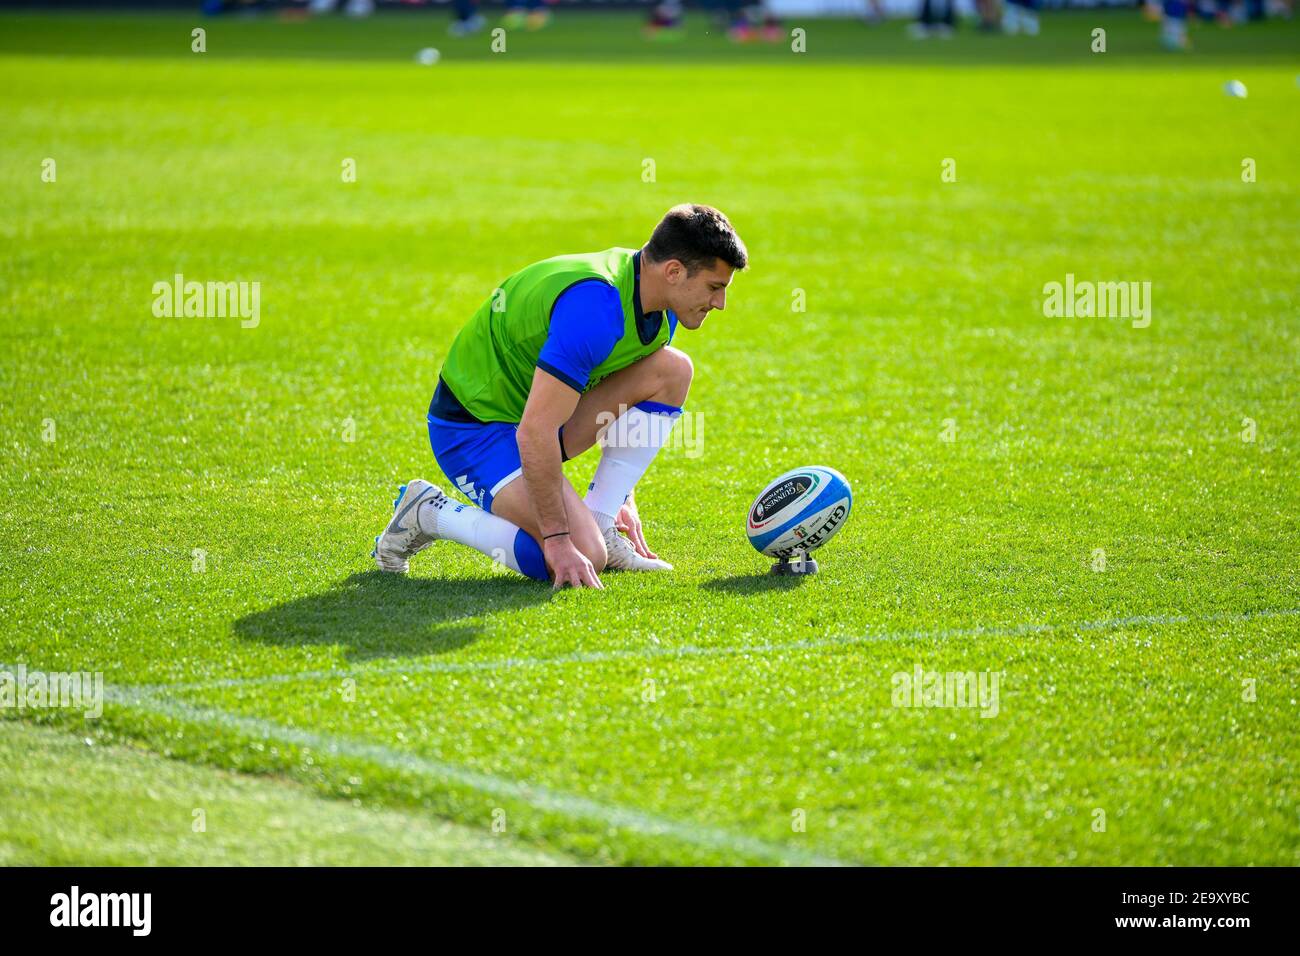 Rome, Italy. 6th Feb, 2021. Rome, Italy, Stadio Olimpico, February 06, 2021, Tommaso Allan (Italy) during Italy vs France - Rugby Six Nations match Credit: Carlo Cappuccitti/LPS/ZUMA Wire/Alamy Live News Stock Photo